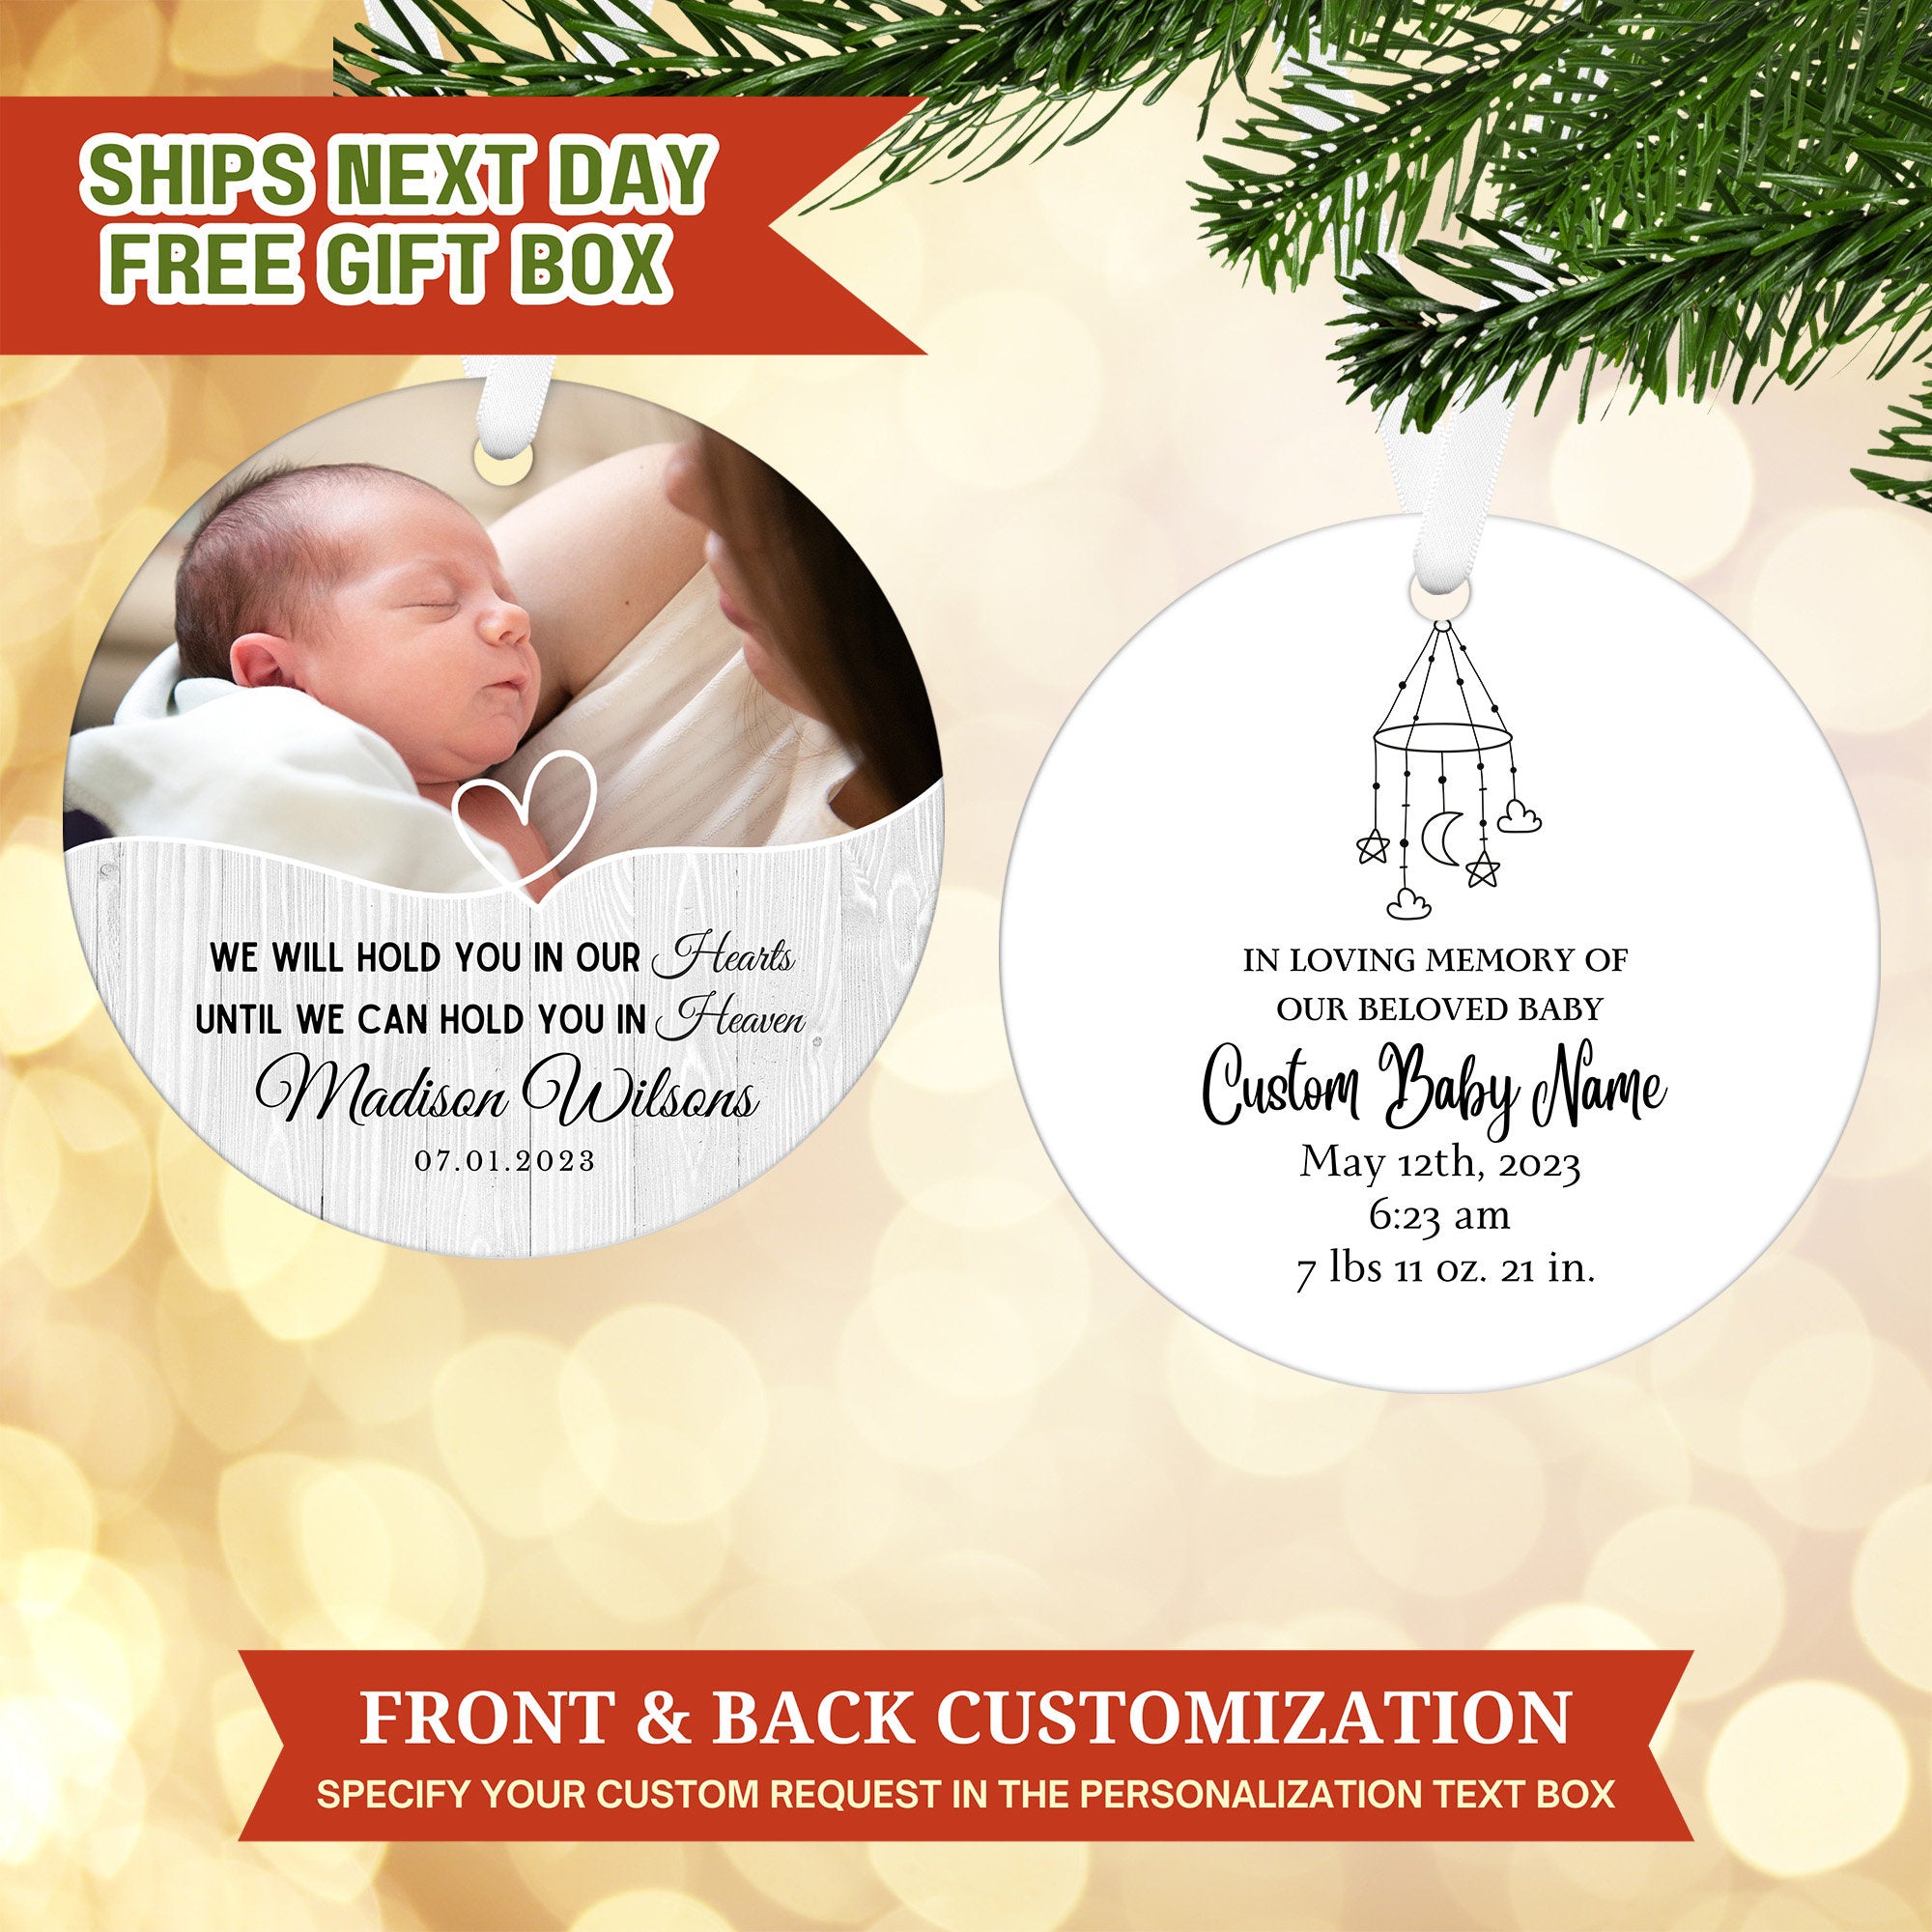 Custom Baby Memorial Ornament, Miscarriage Gift, Baby Ornament, Custom Photo Christmas Ornament, Grandma Ornament, Child Loss Sympathy Gift